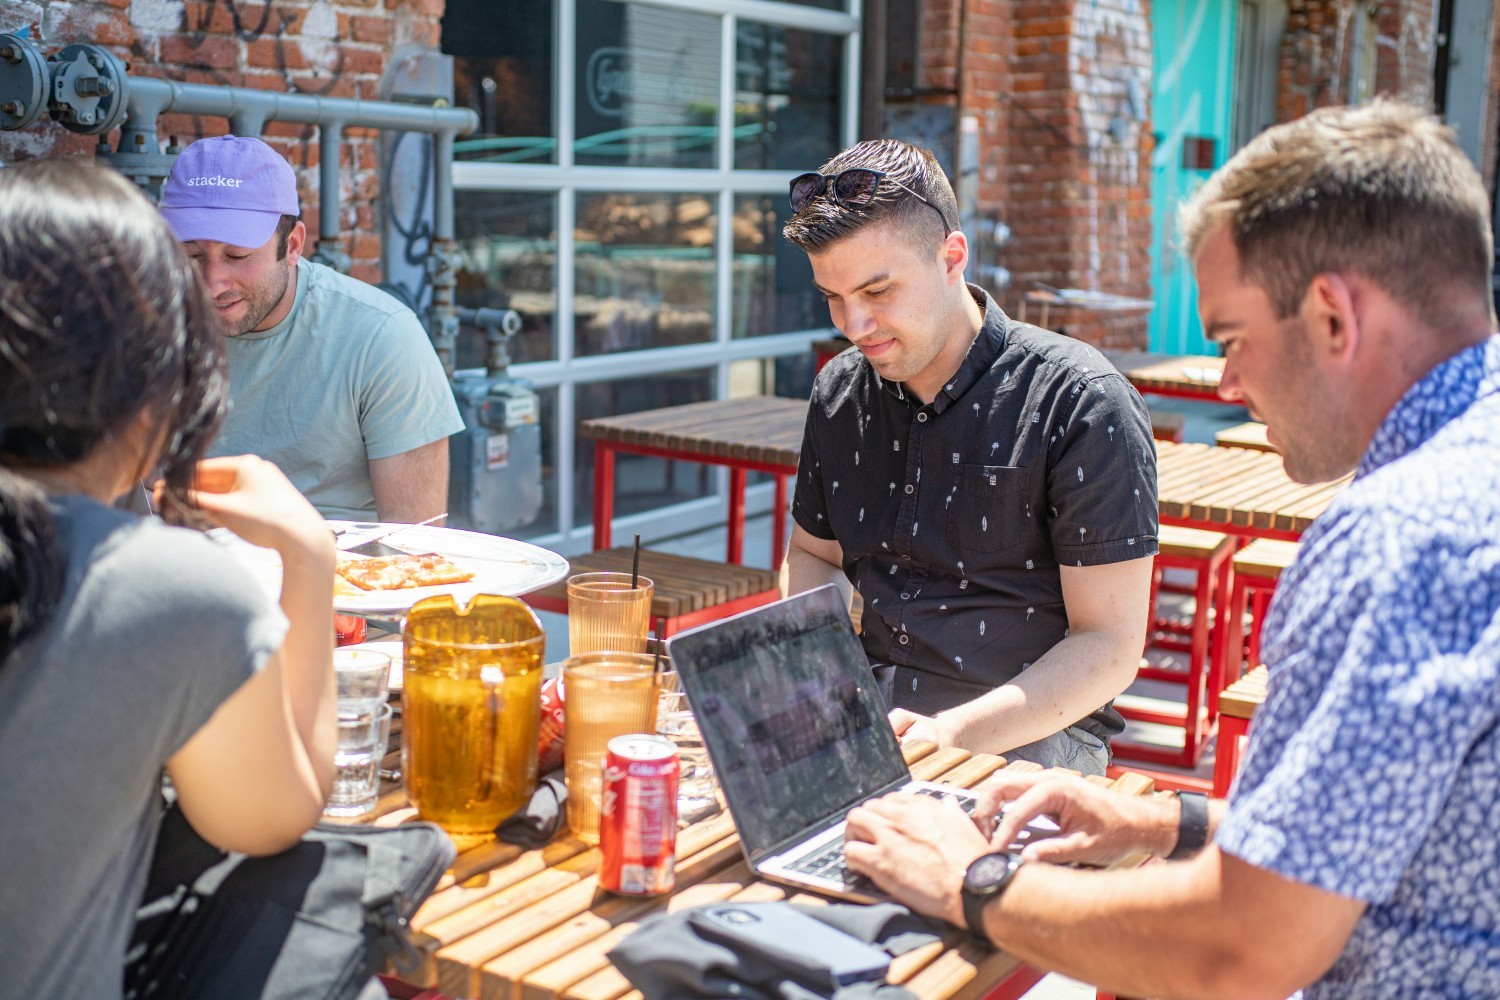 Stacker employees enjoying a productive working lunch outdoors